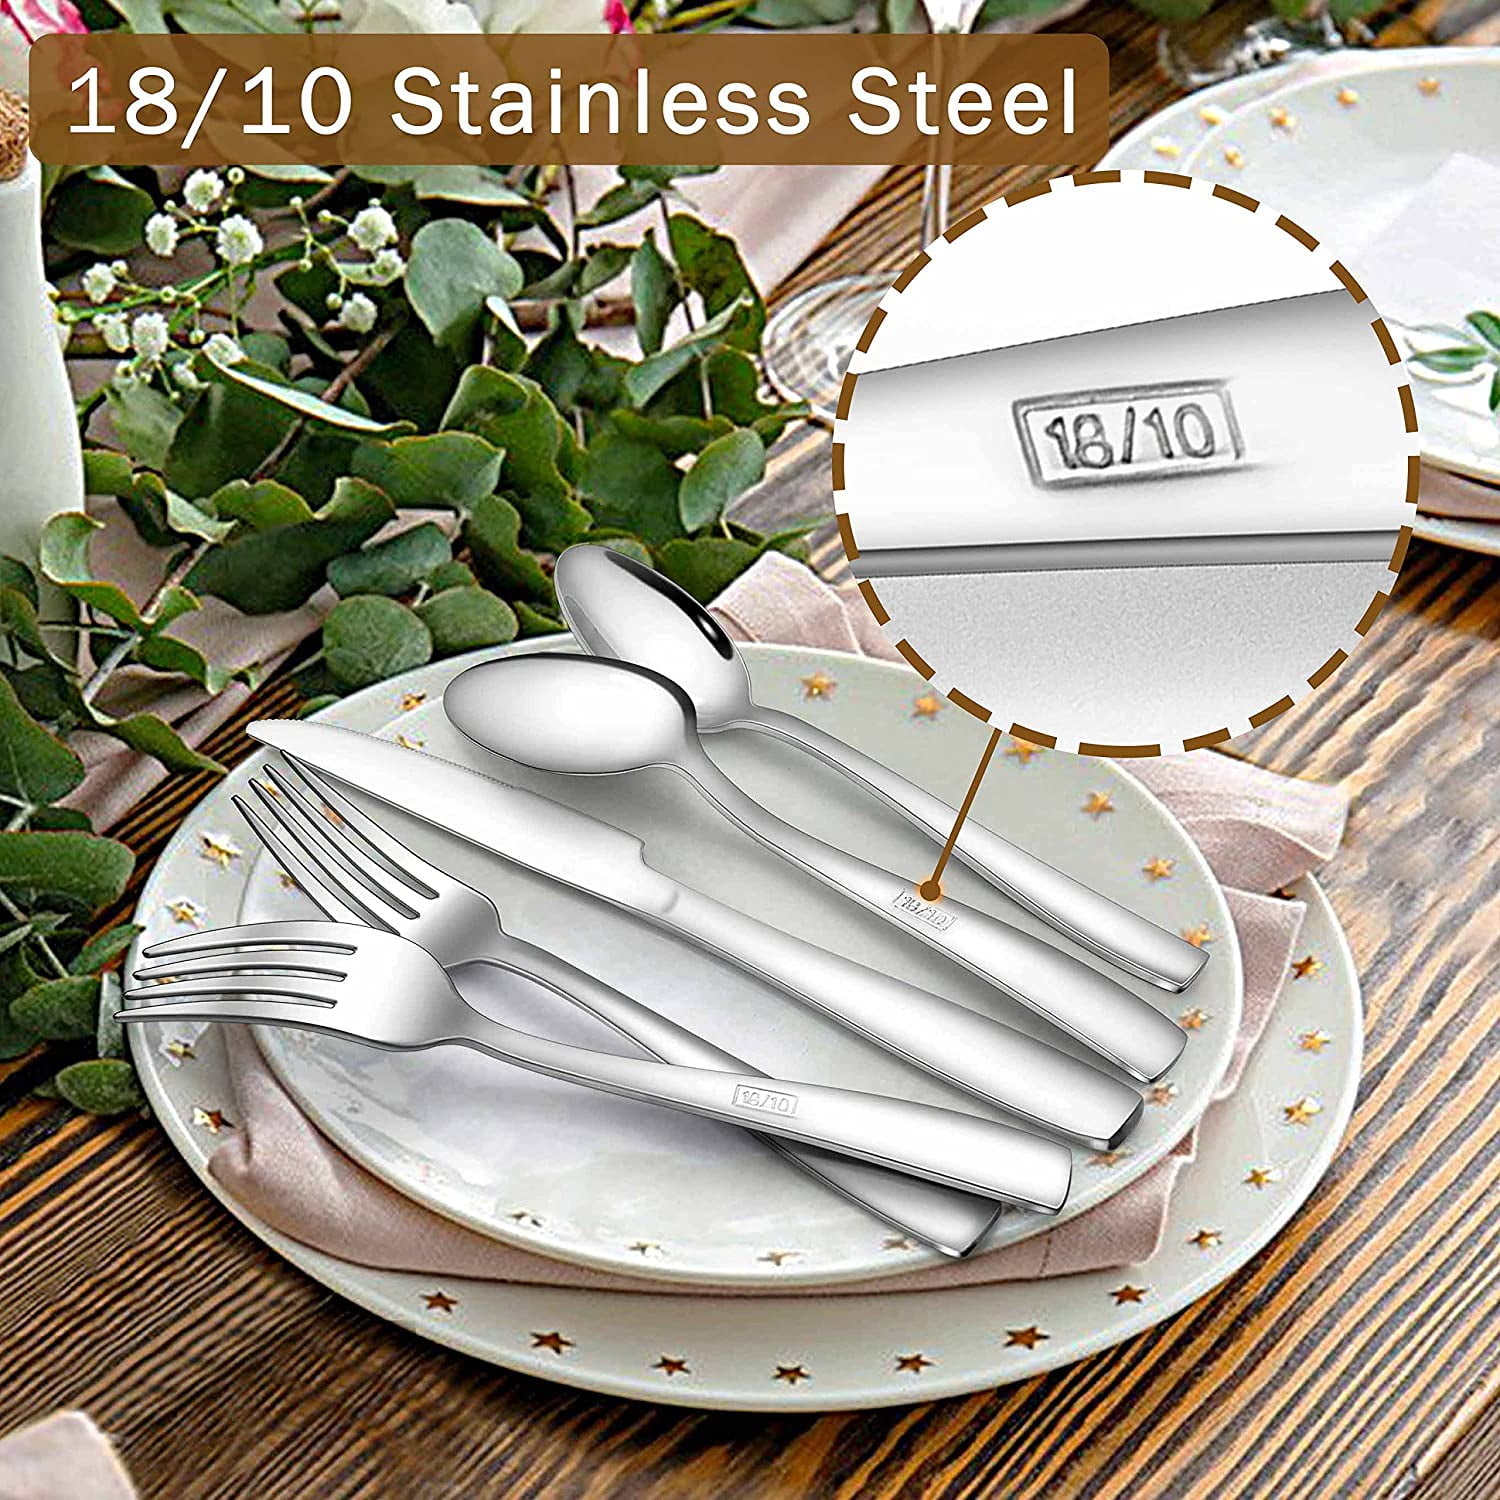 60-Piece Silverware Set, E-far Stainless Steel Flatware Set Service for 12,  Tableware Cutlery Set for Home Restaurant Party, Dinner